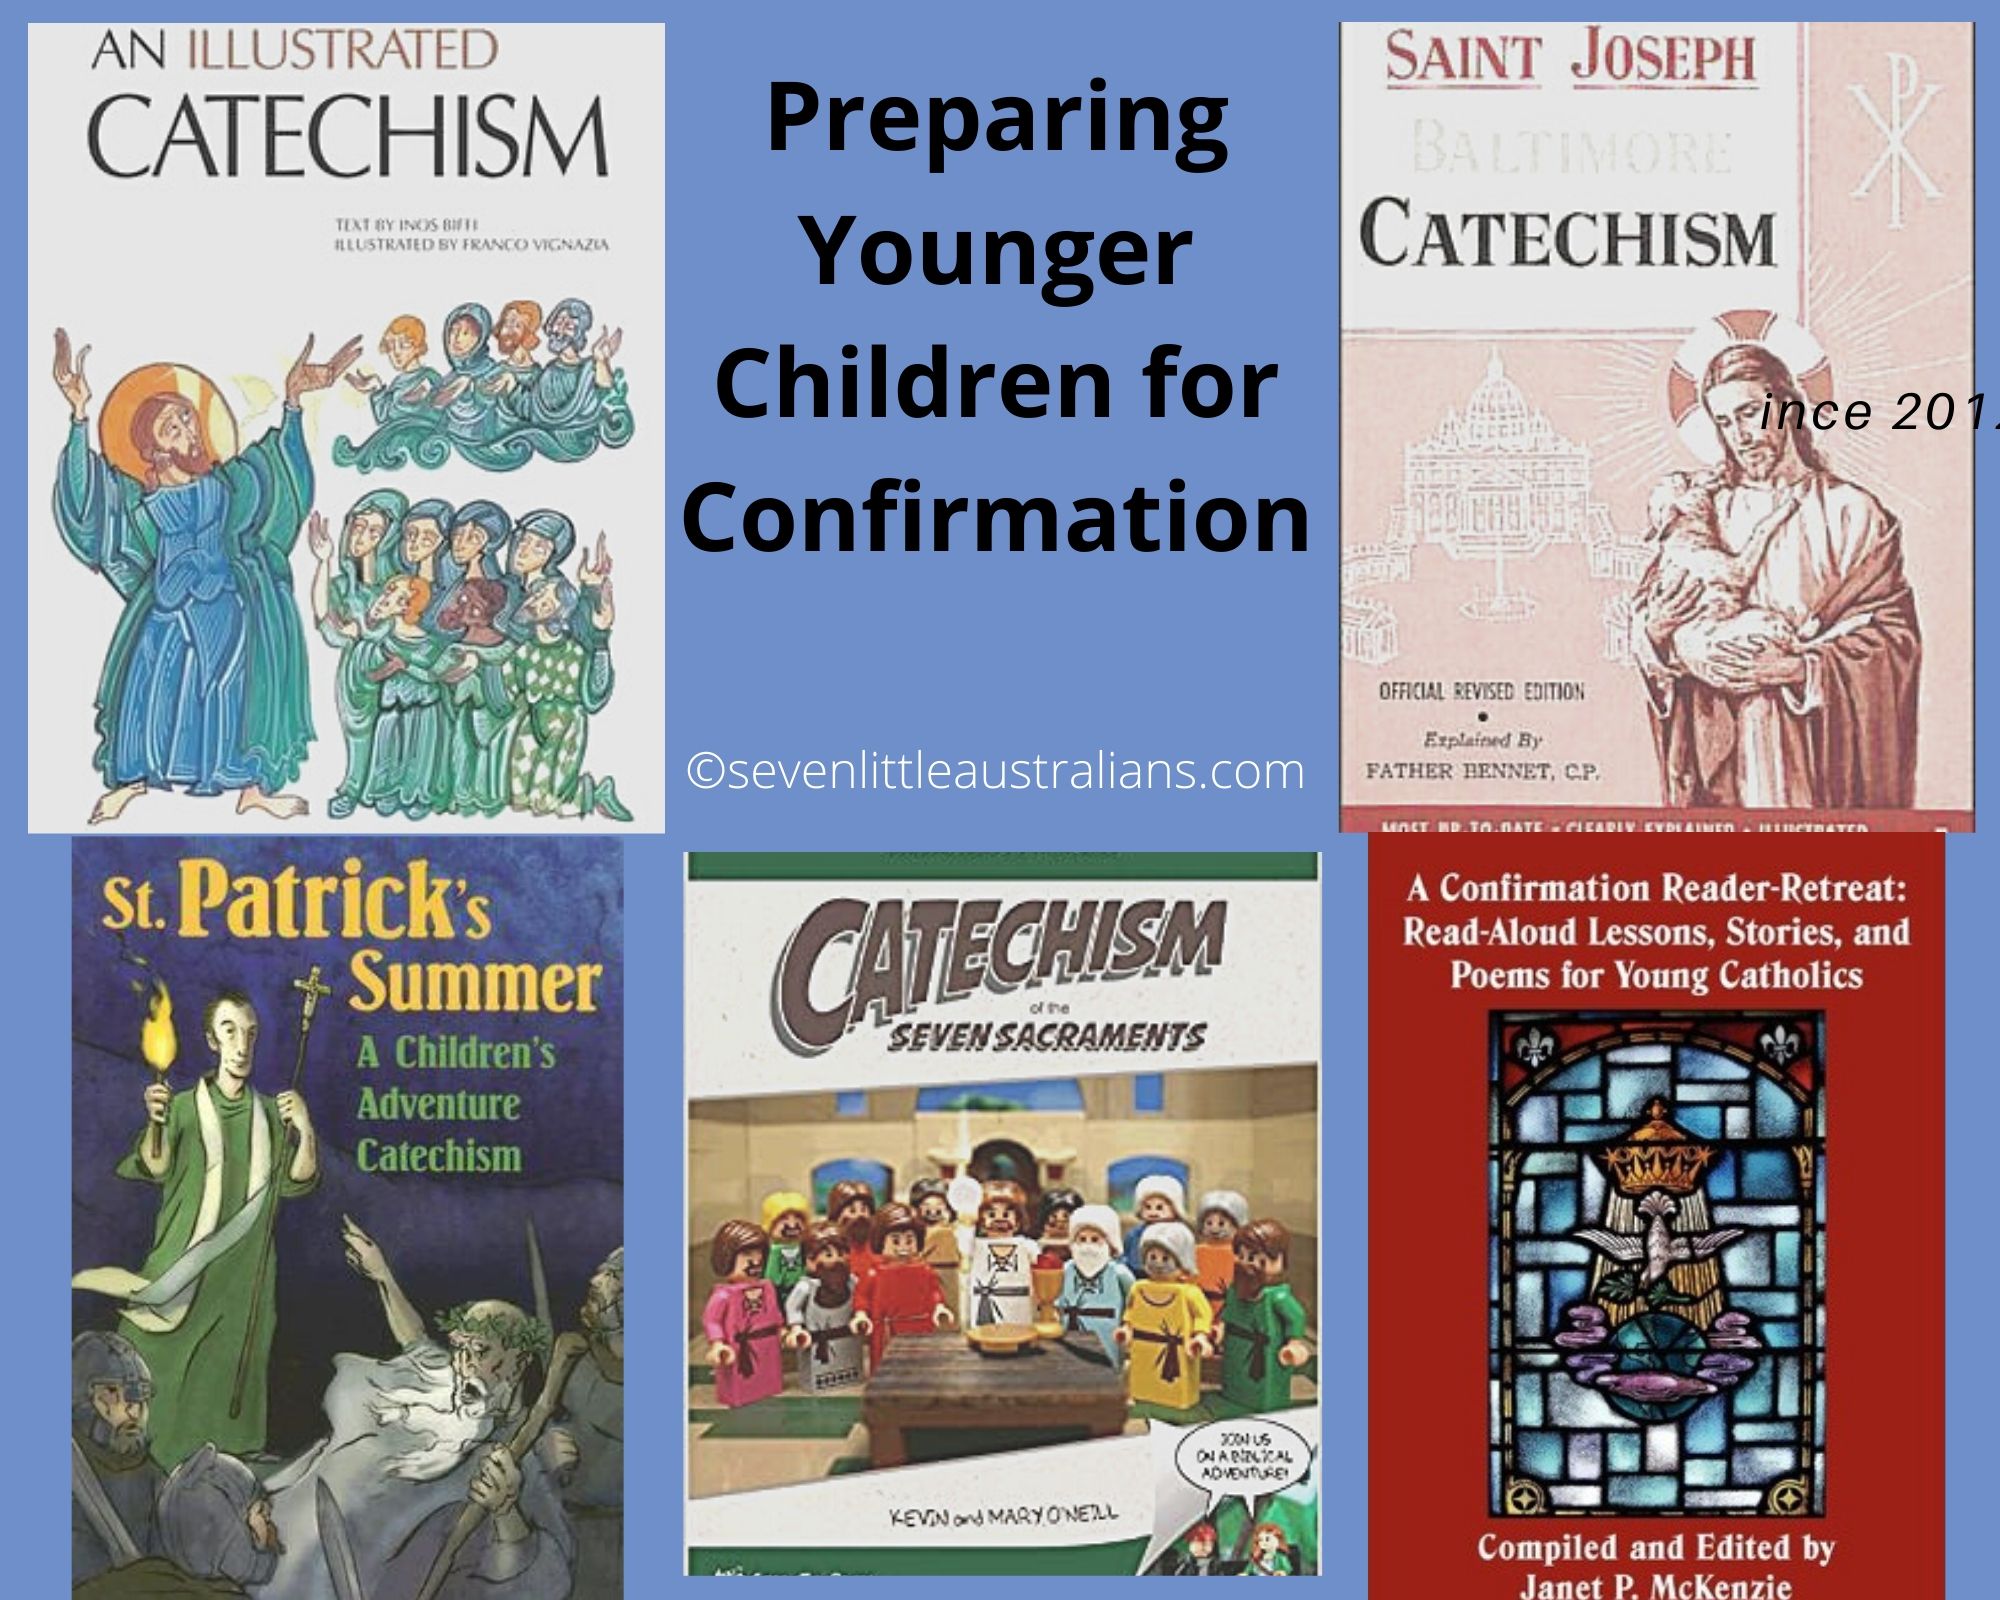 Preparing Younger Children for Confirmation